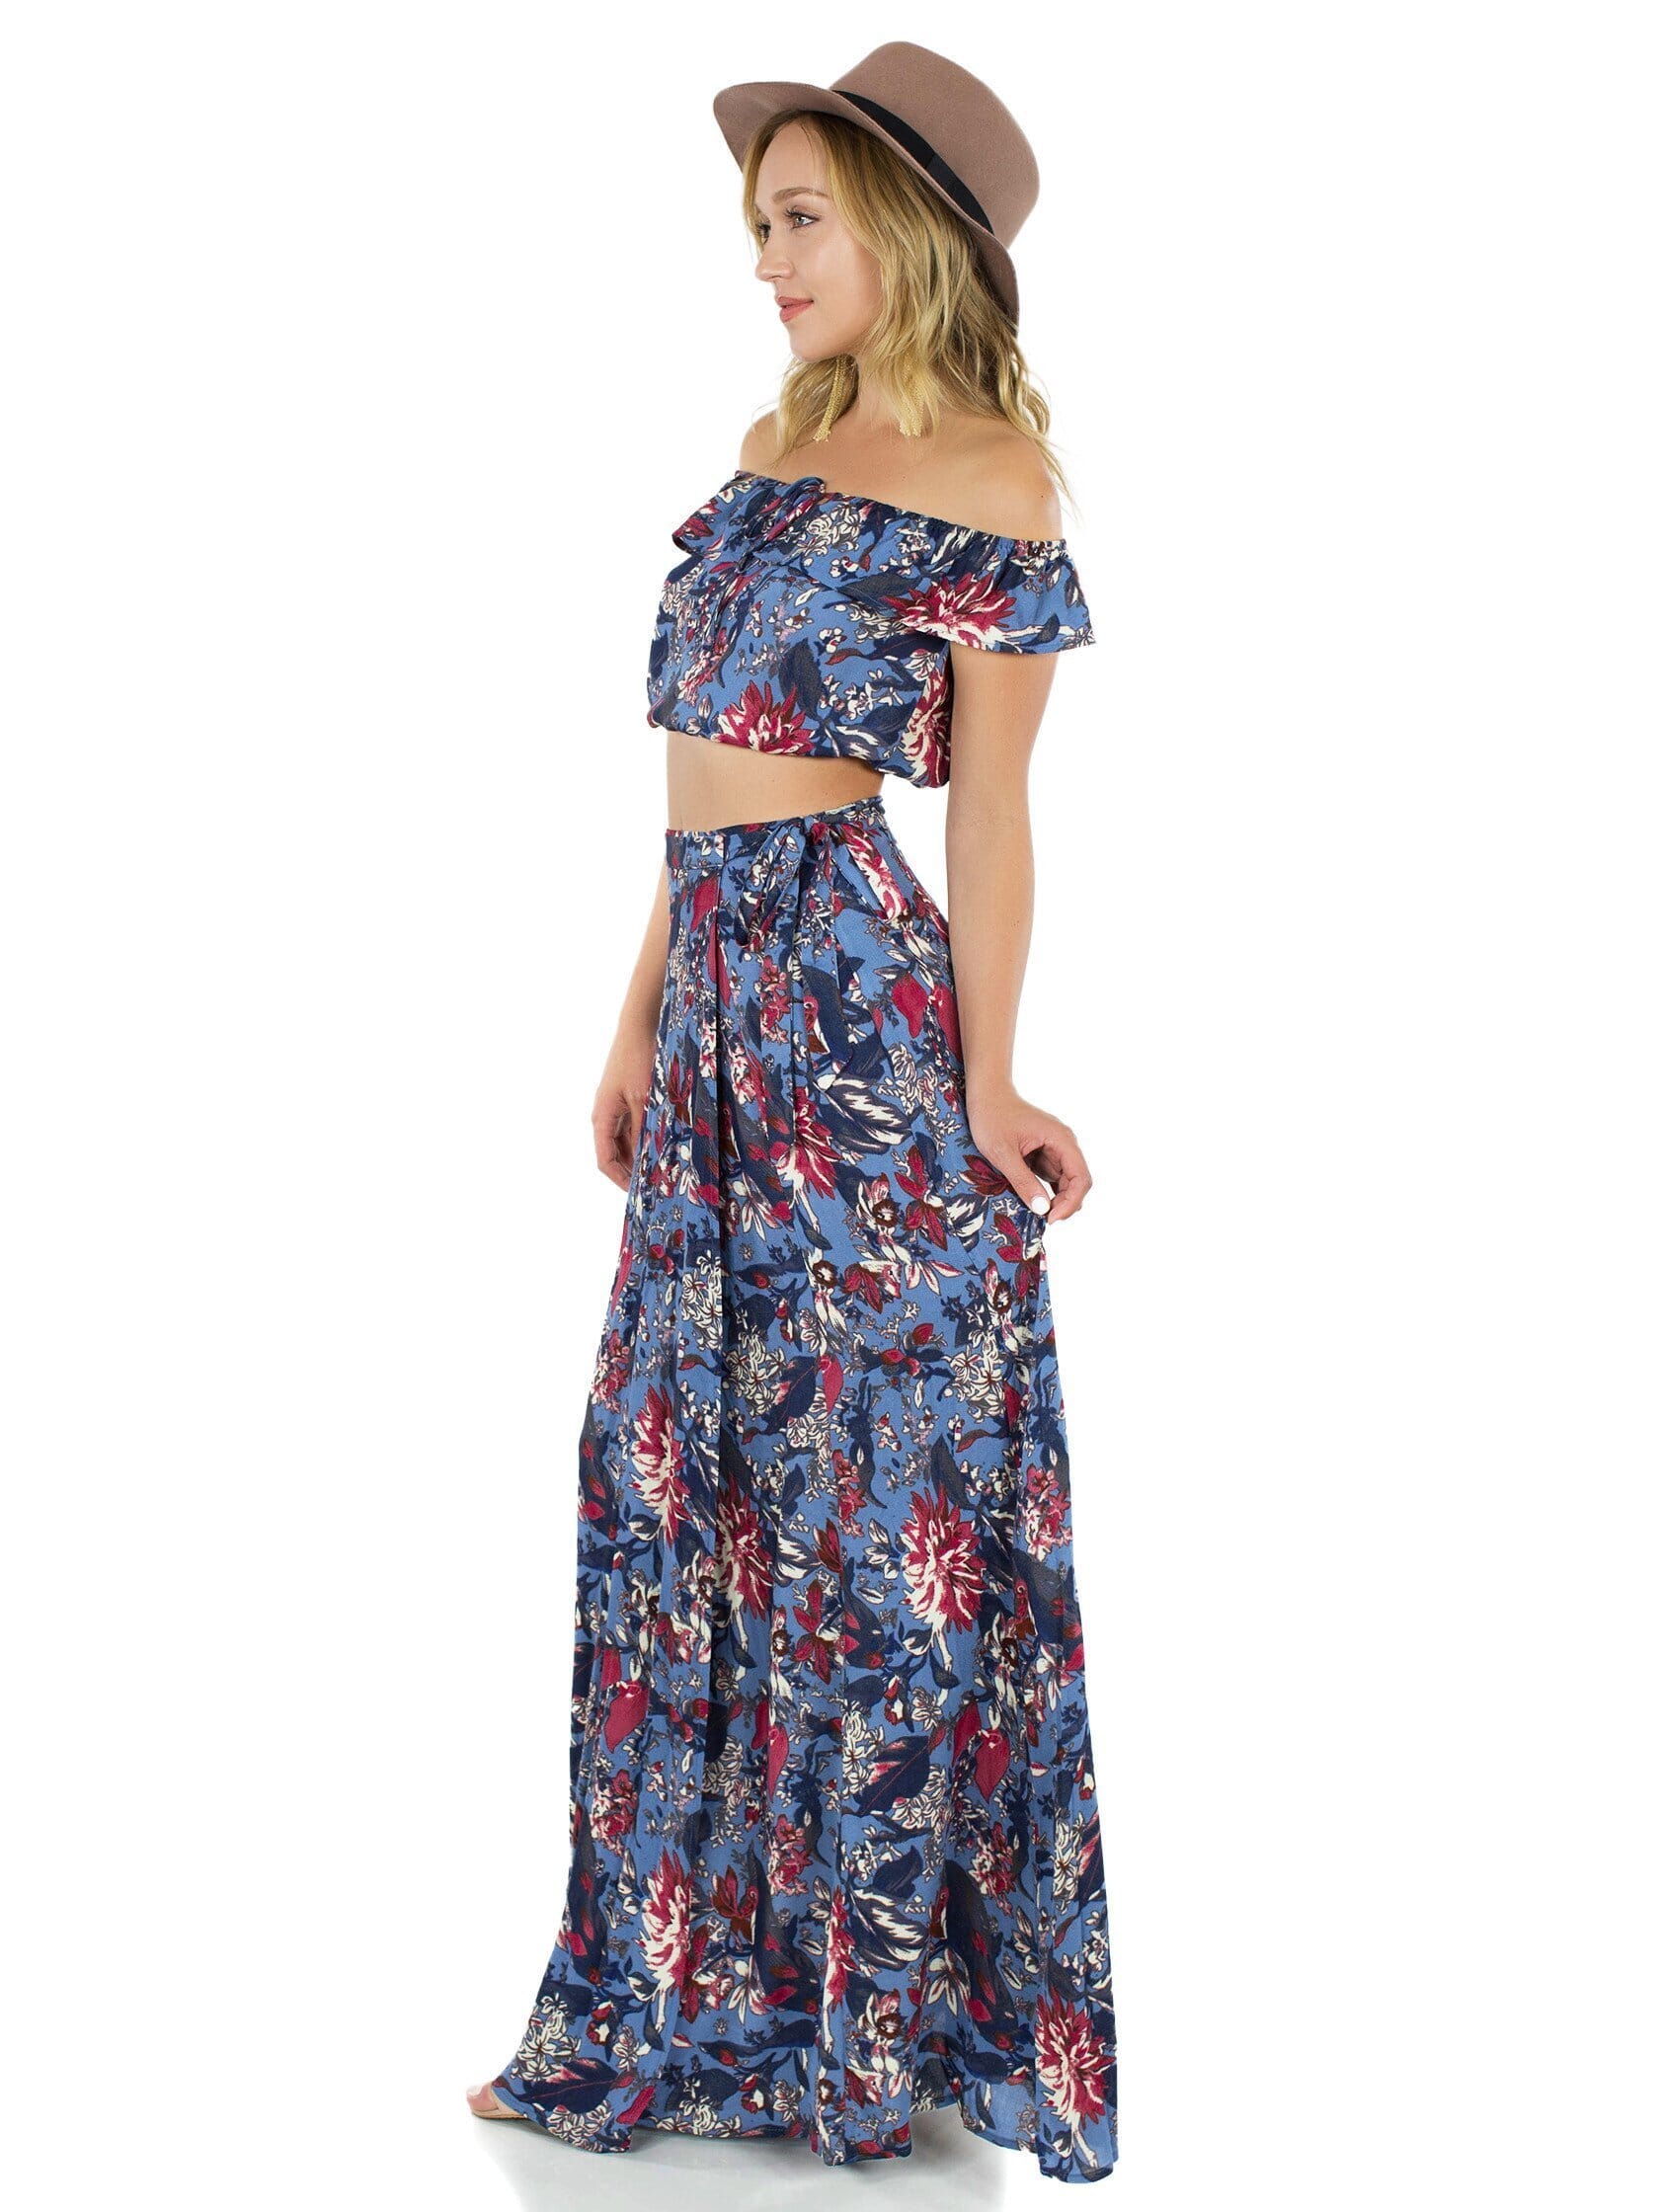 FashionPass Looking For Adventure Two-Piece Set in Blue/Floral